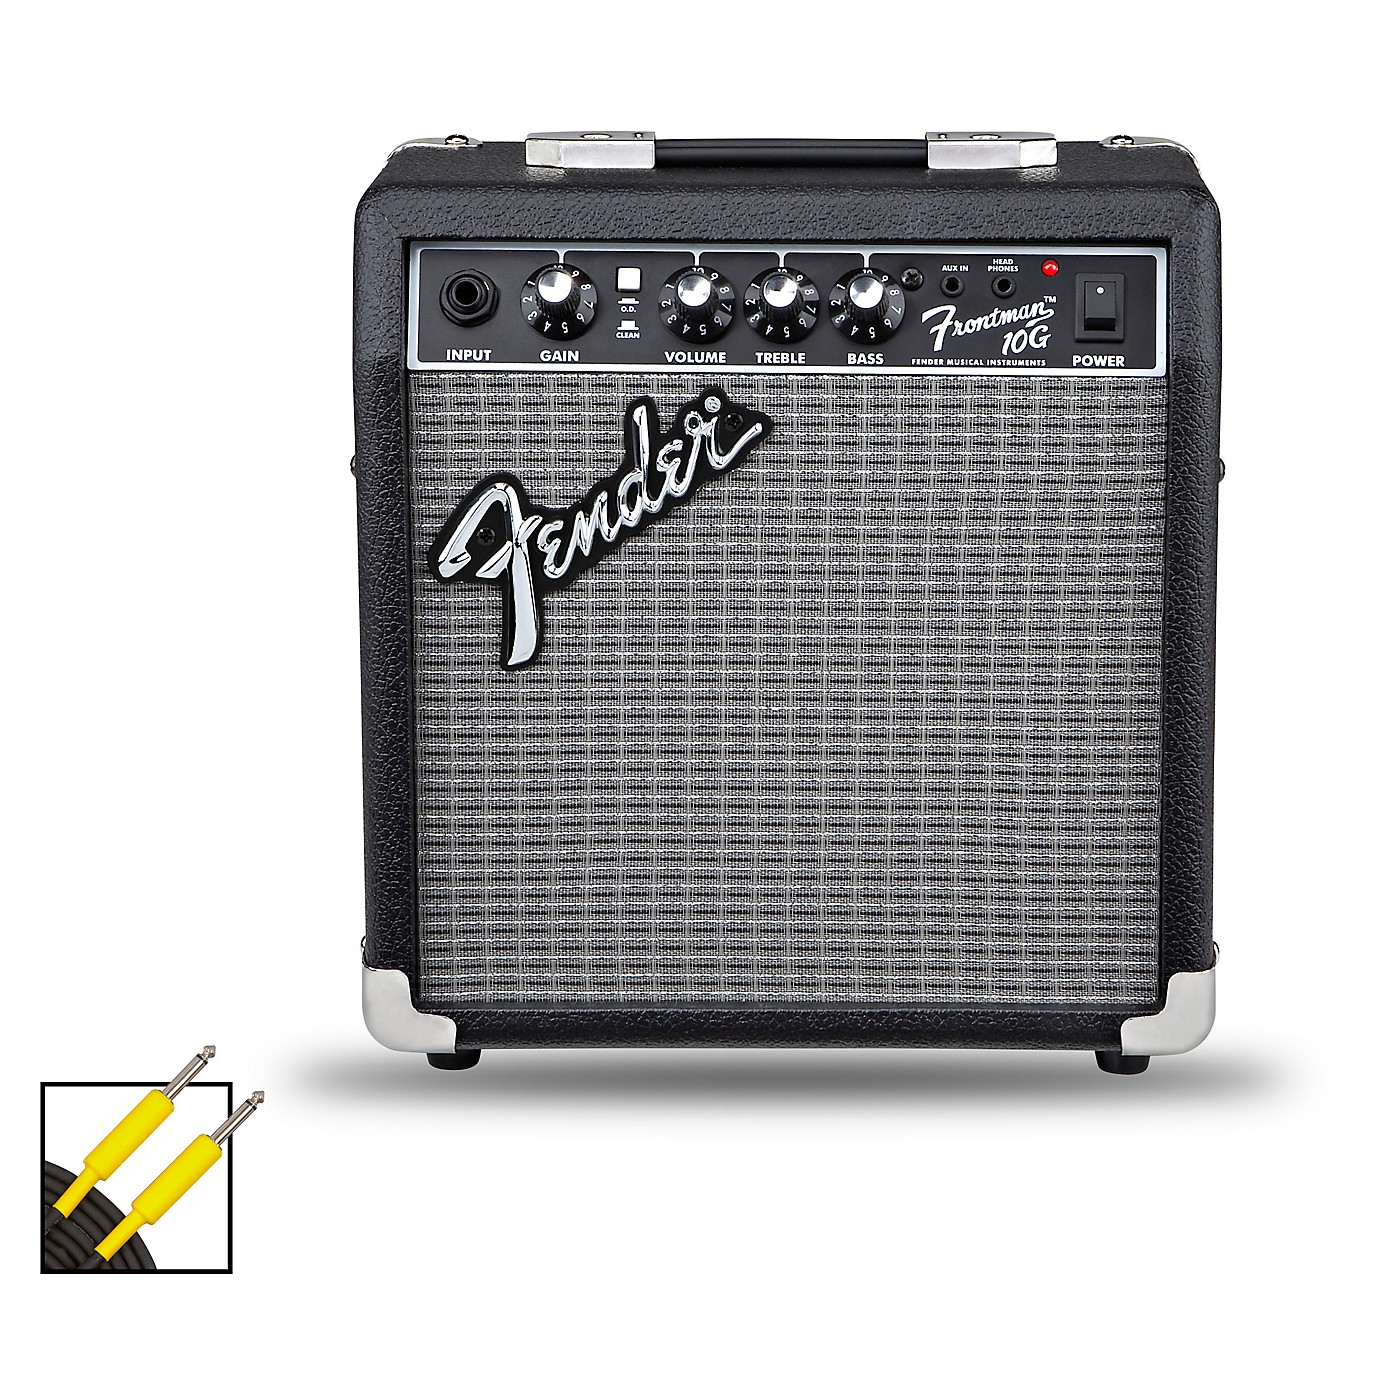 Fender Frontman 10G 10W Guitar Combo Amp with 20 Foot Instrument Cable thumbnail